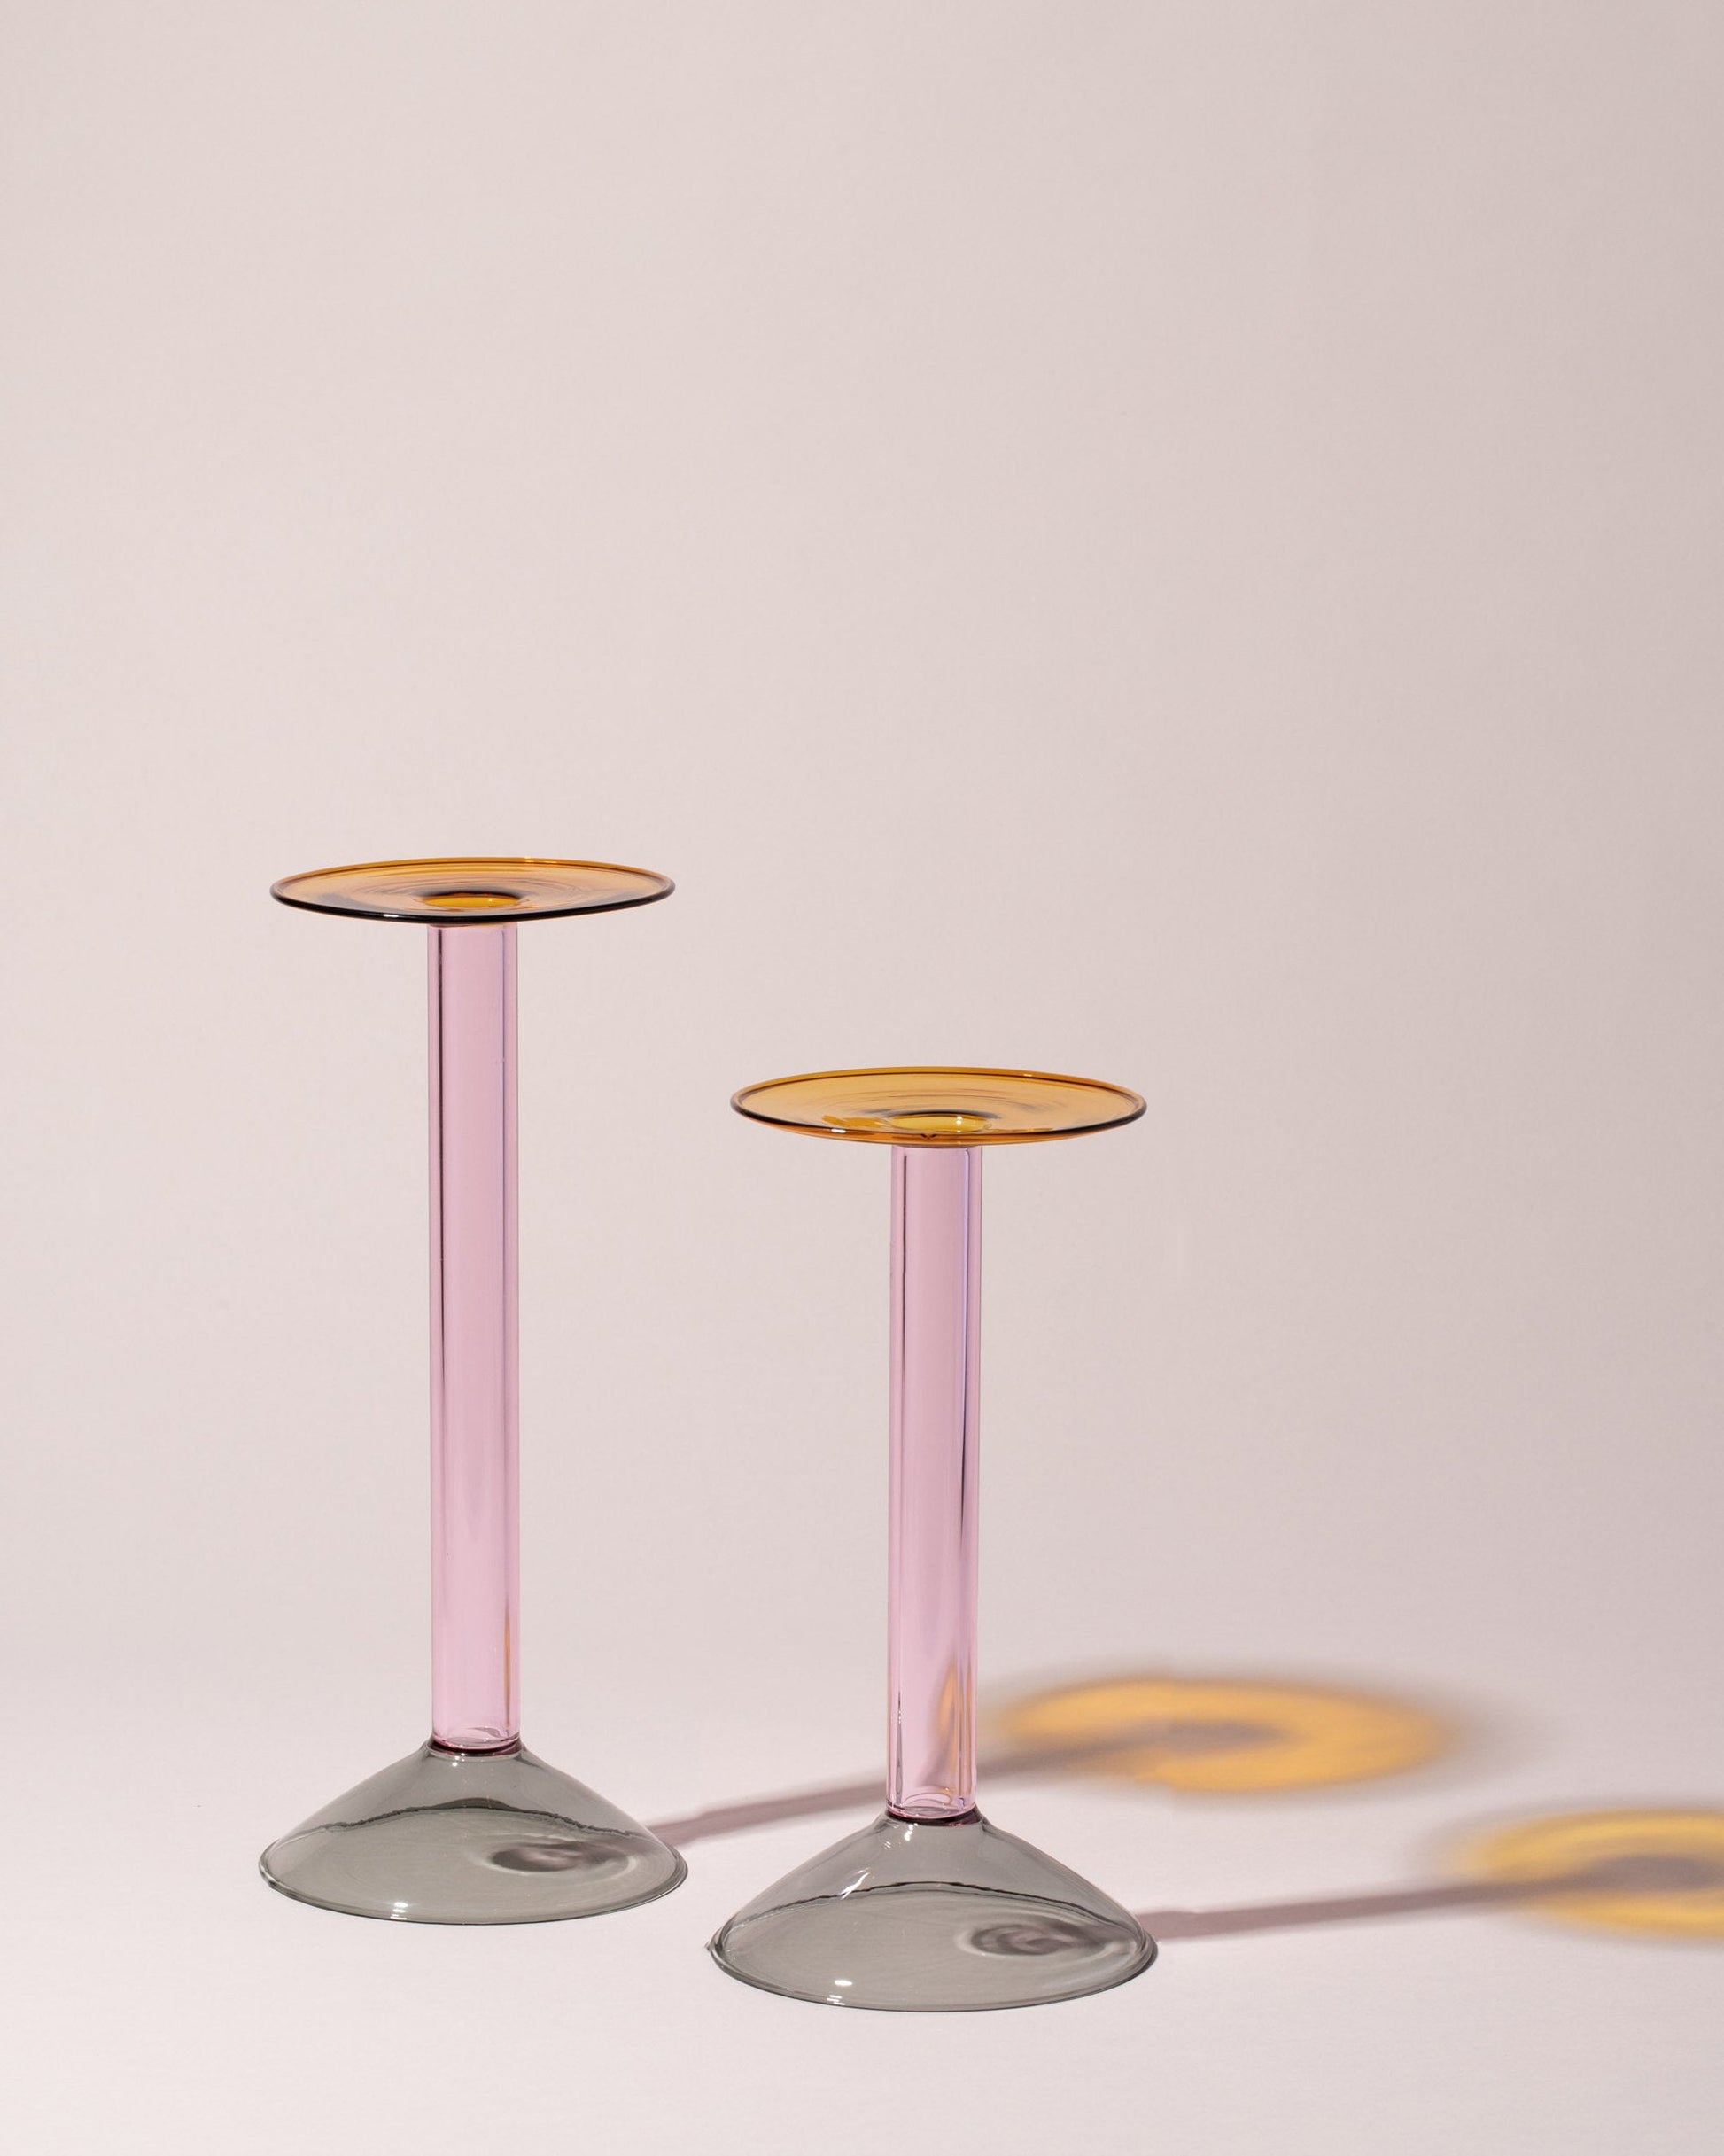 Group of Ichendorf Milano Large Grey/Pink/Amber and Medium Grey/Pink/Amber Rainbow Candleholders on light color background.